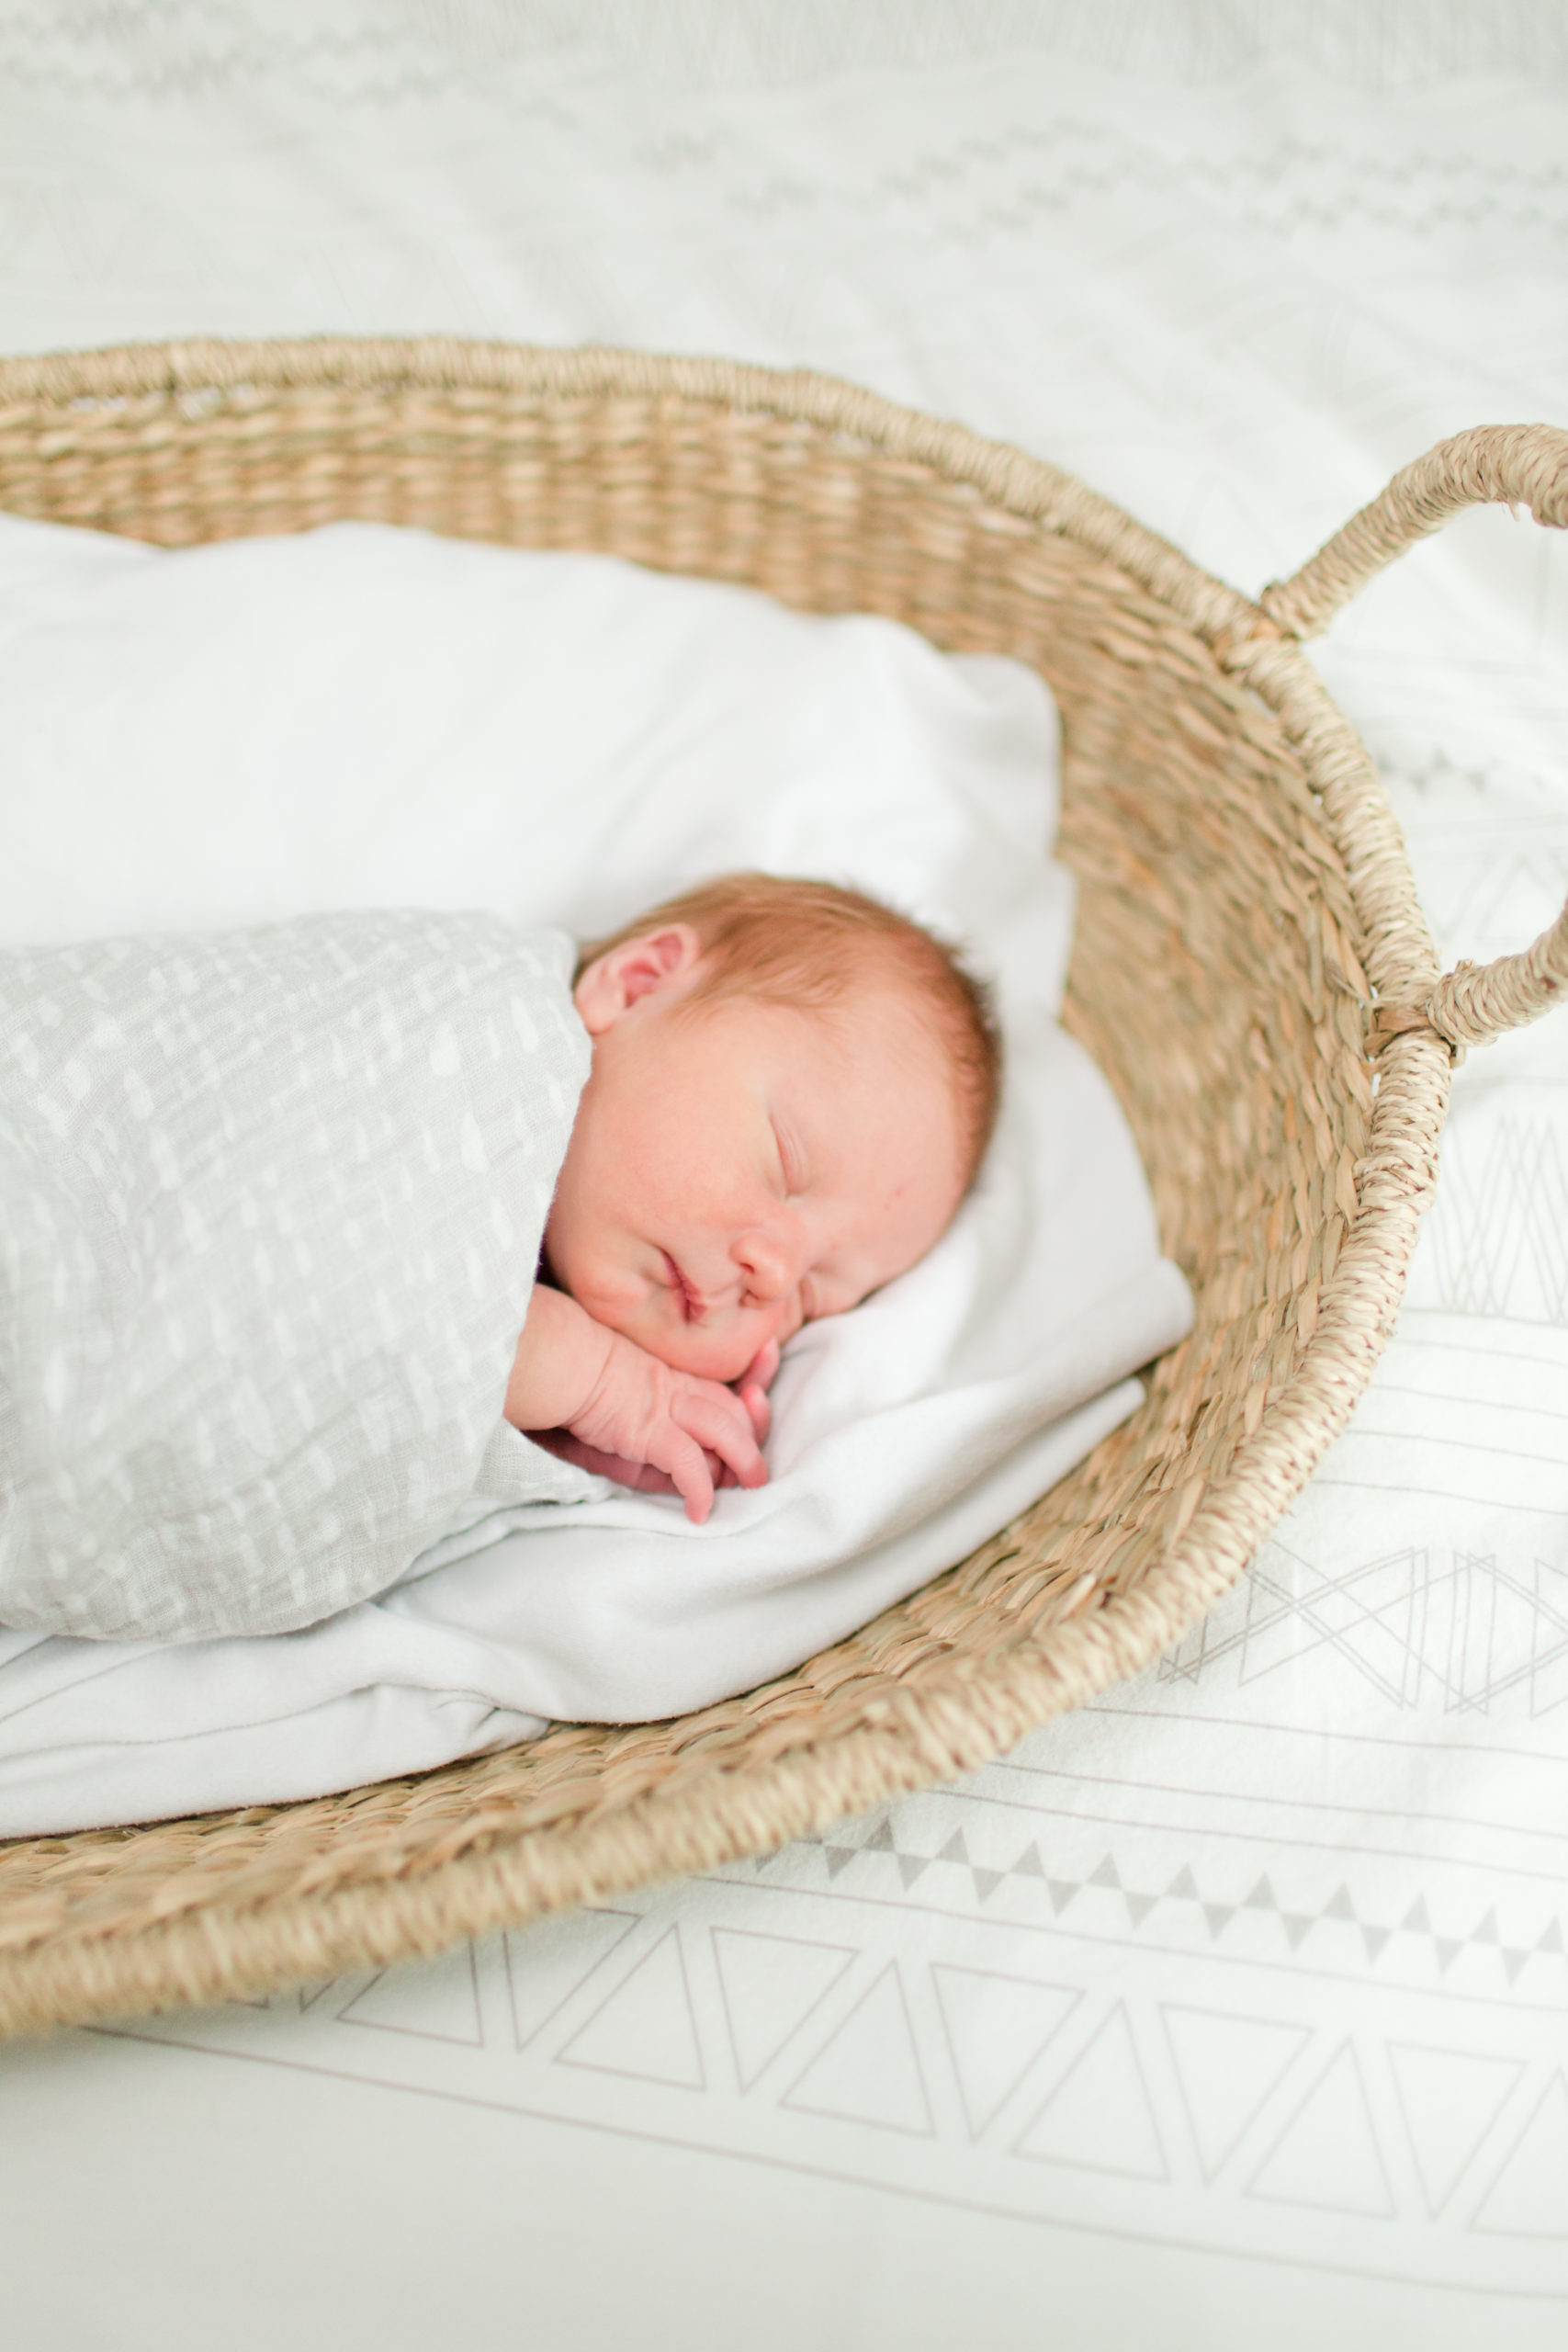 Boston Newborn Photographer - Newborn baby wrapped in swaddle sleeping in moses basket